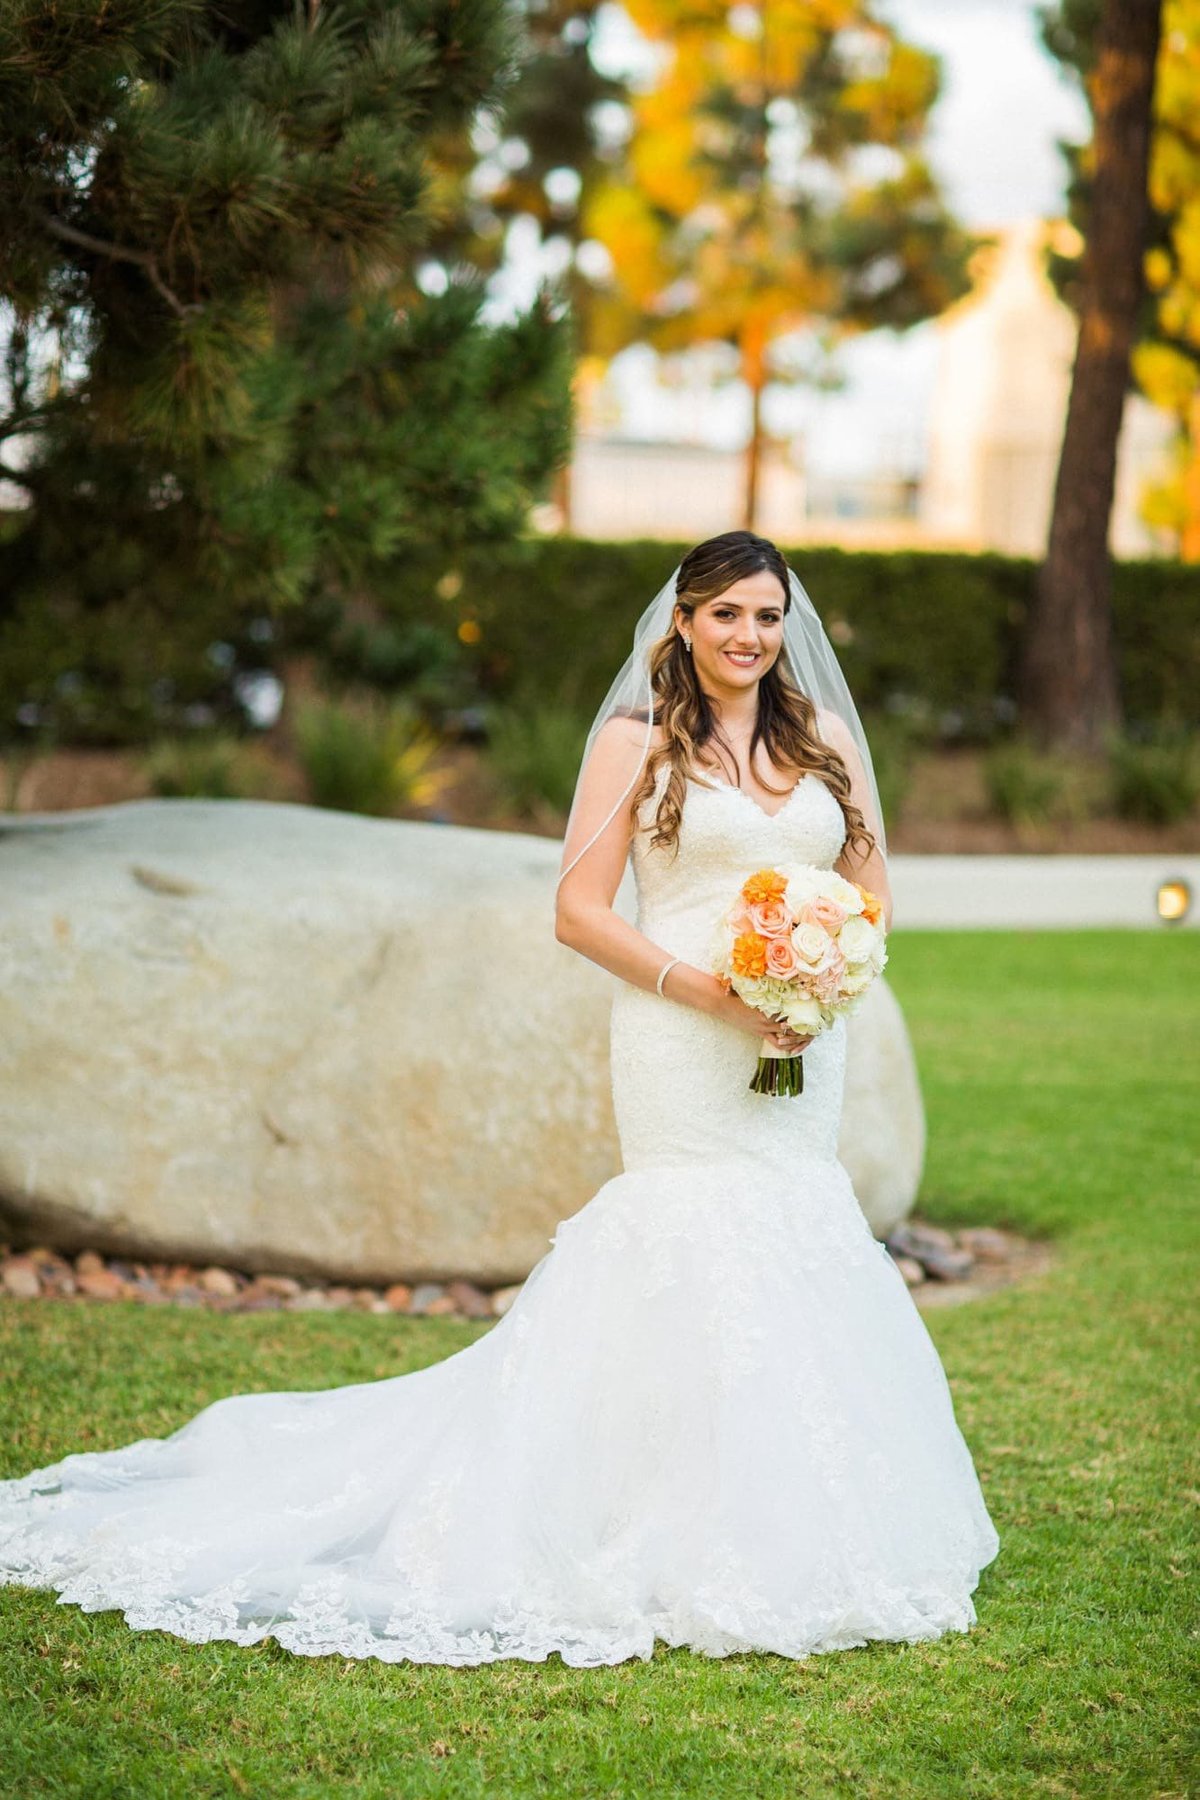 Beautiful Bride poses for the wedding photographer with her train fanned out